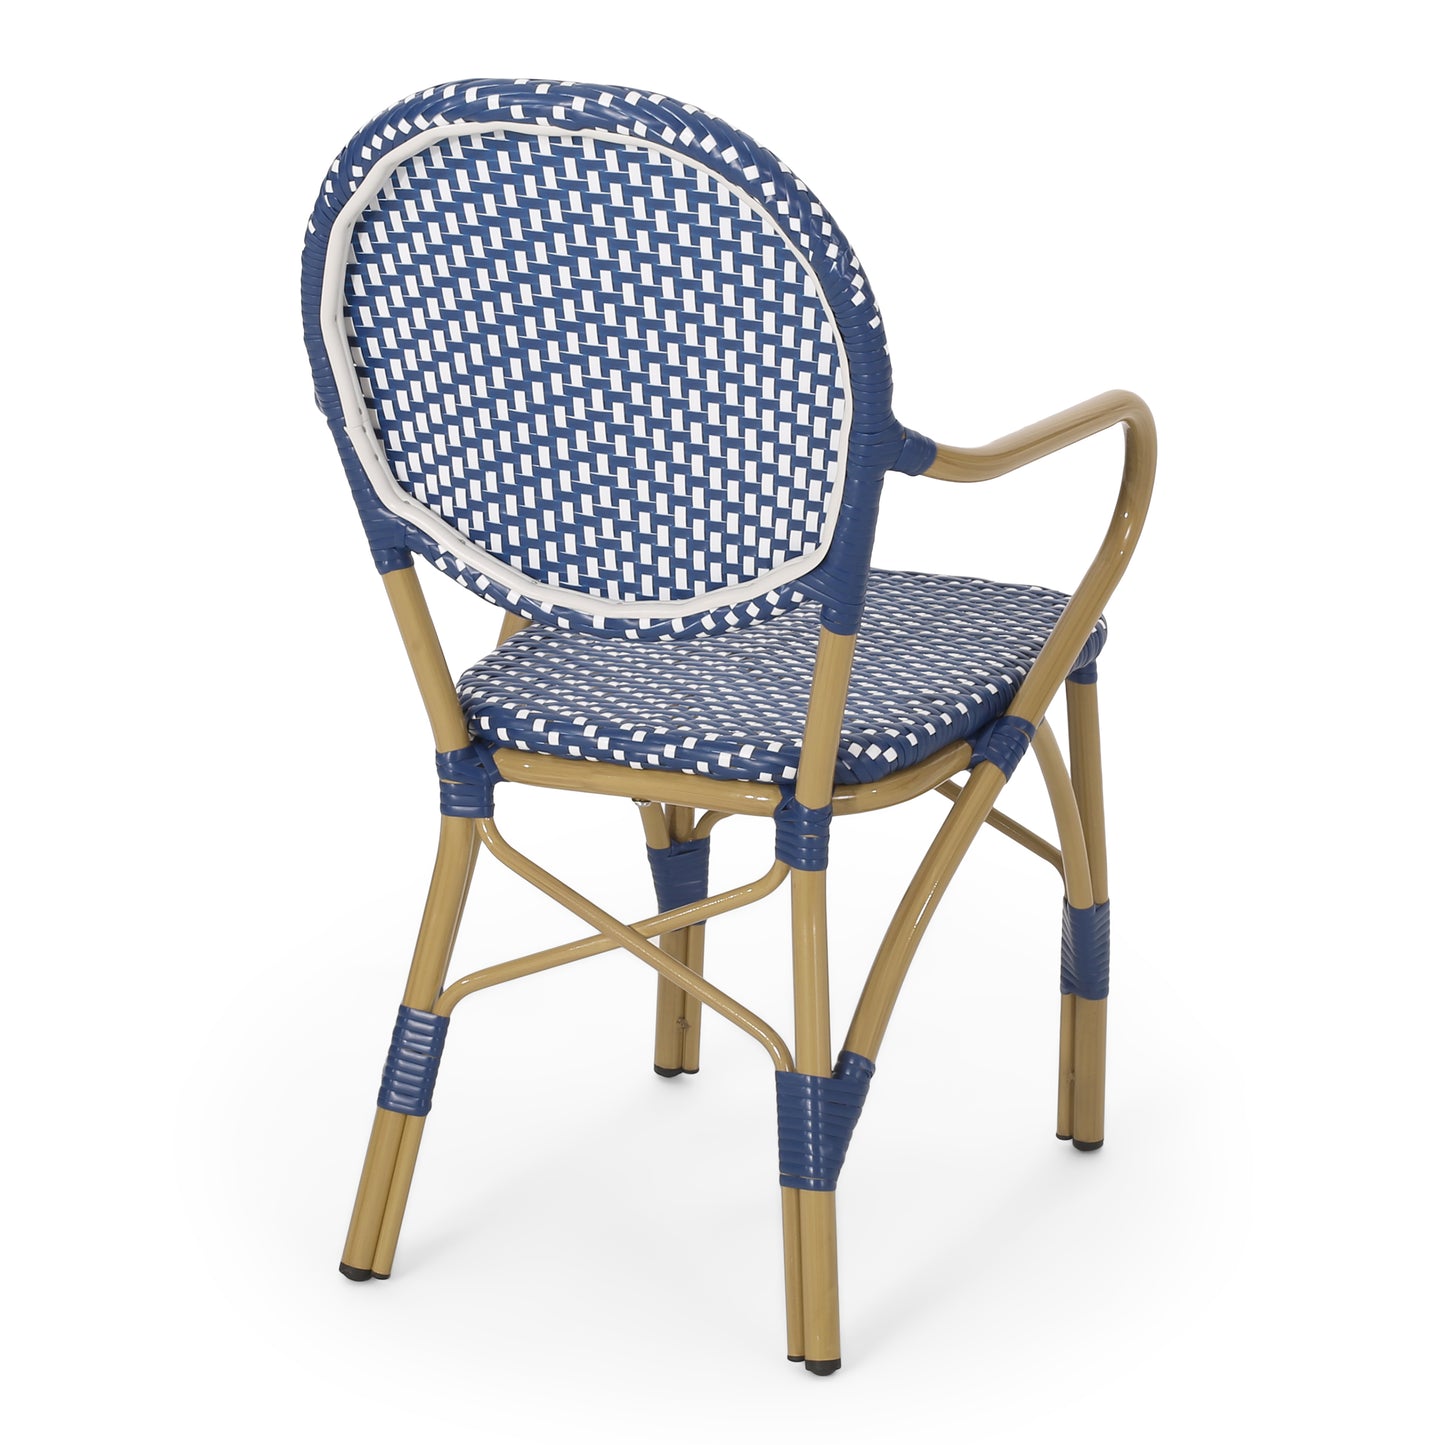 Groveport Outdoor Aluminum French Bistro Chairs, Set of 2, Dark Teal, White, and Bamboo Finish